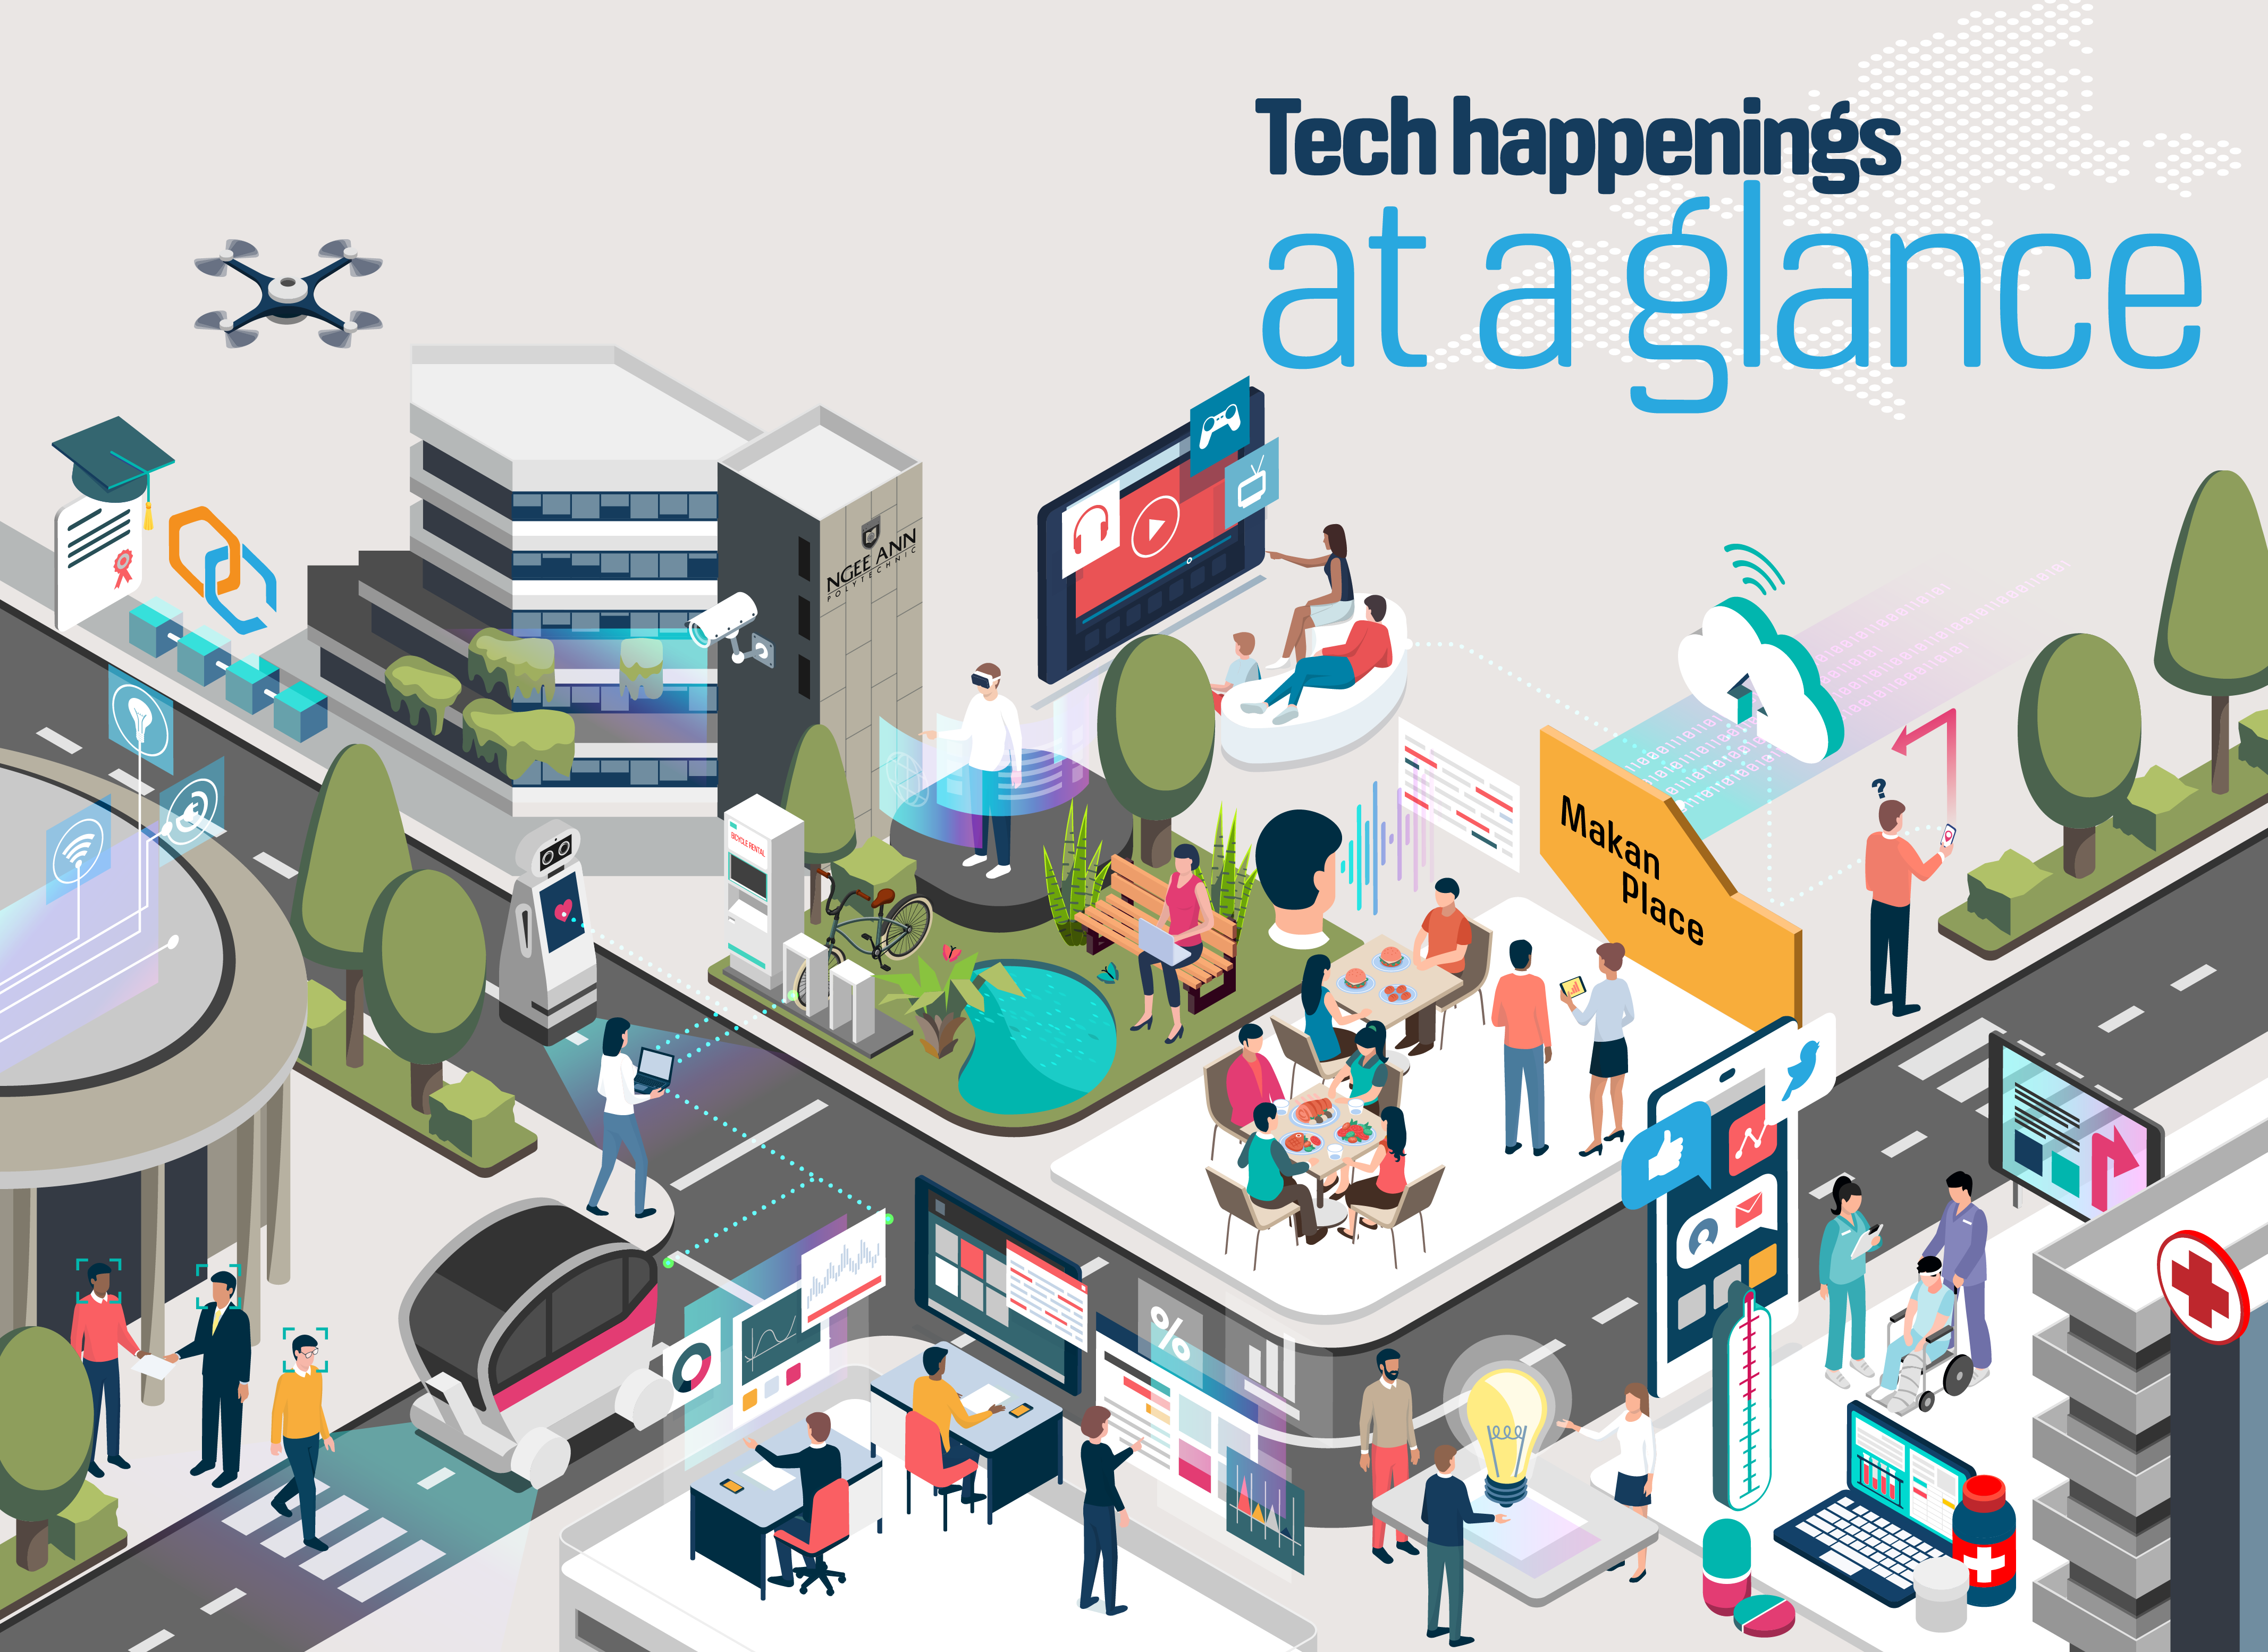 Tech happenings at a glance